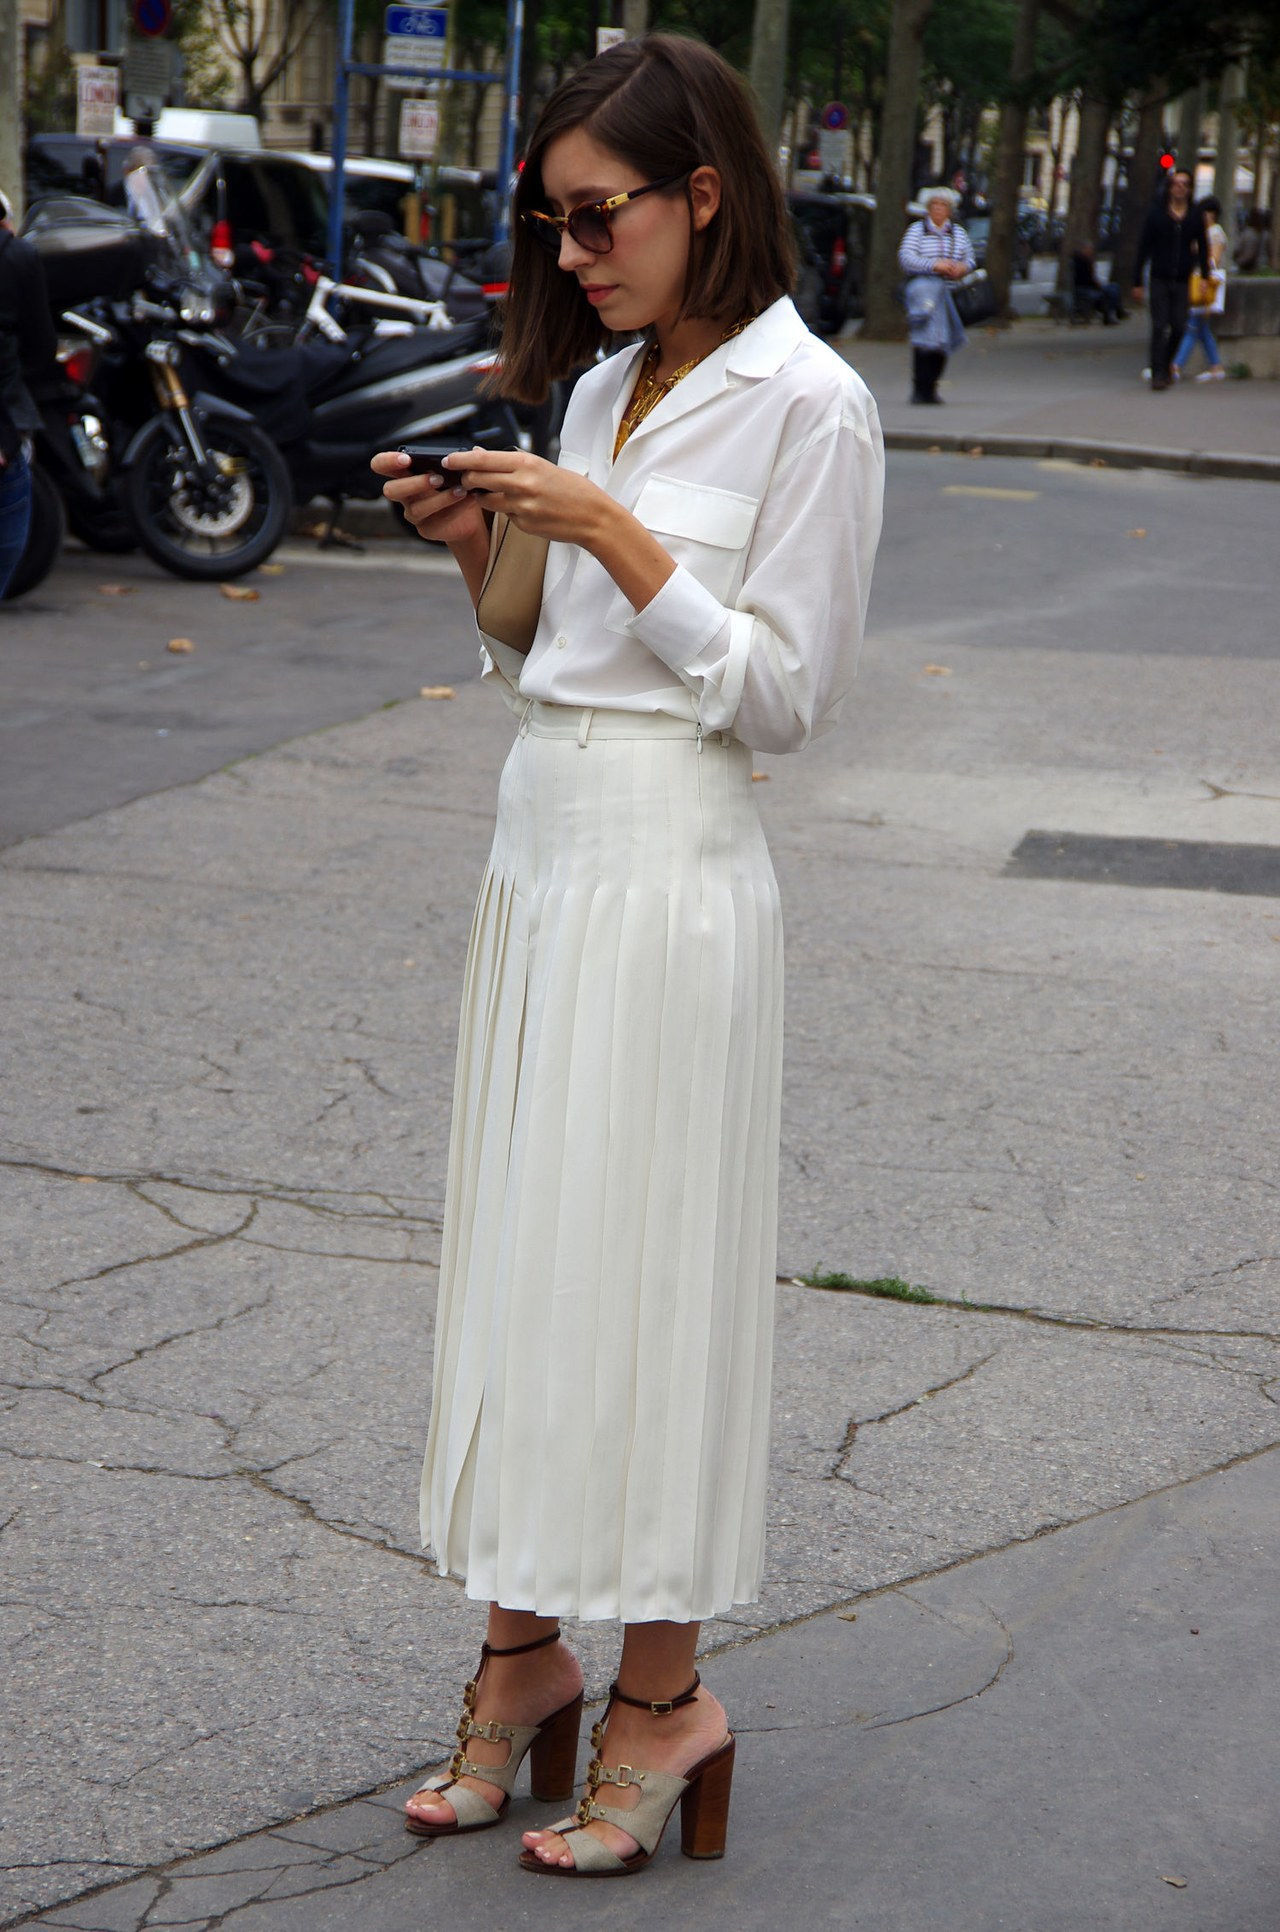 white shirt outfit ideas work white pleated skirt getty images